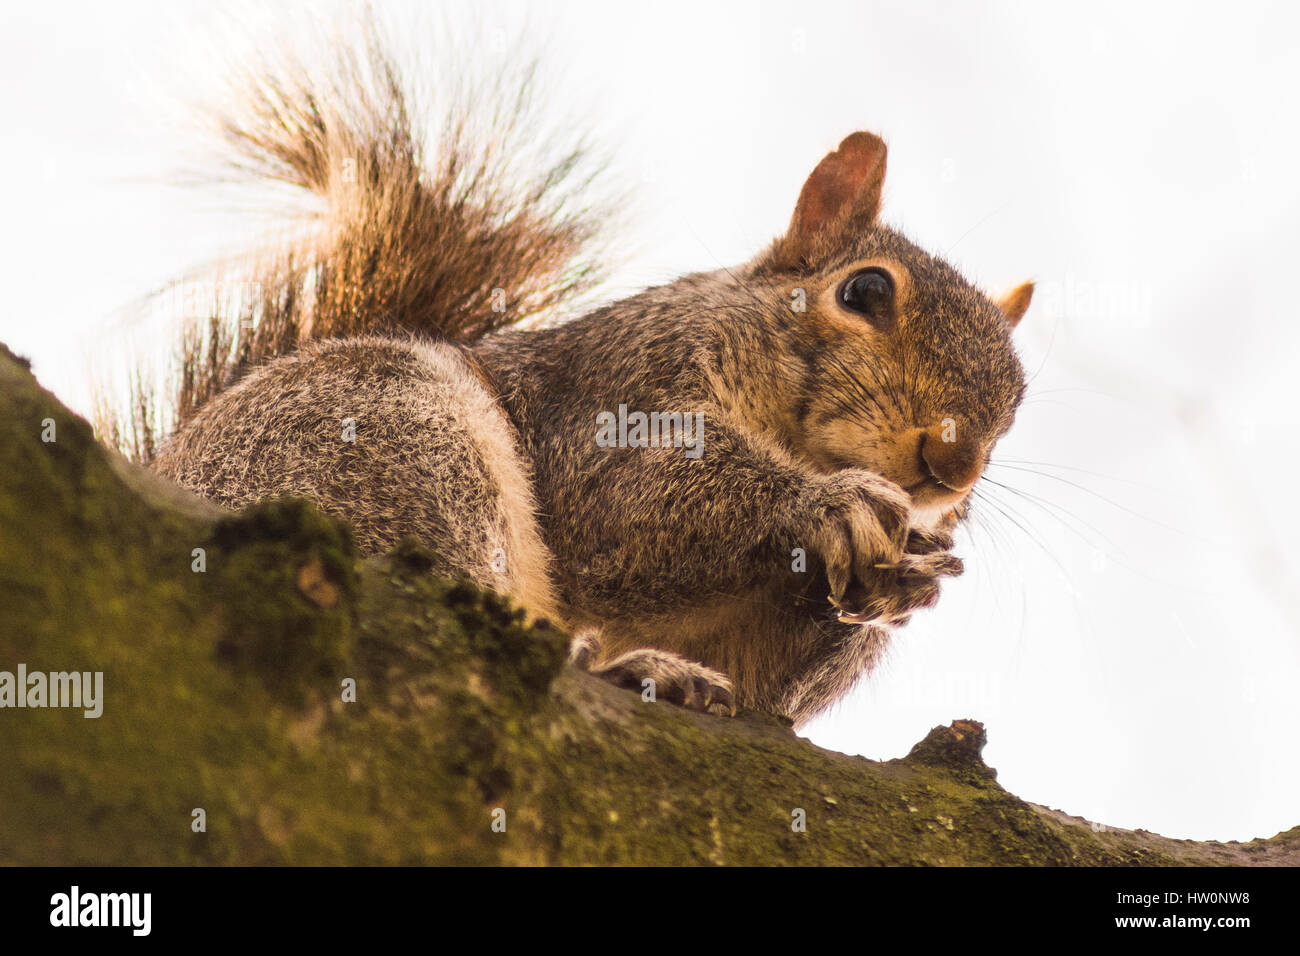 Squirrel In A Tree Eating Nuts Stock Photo